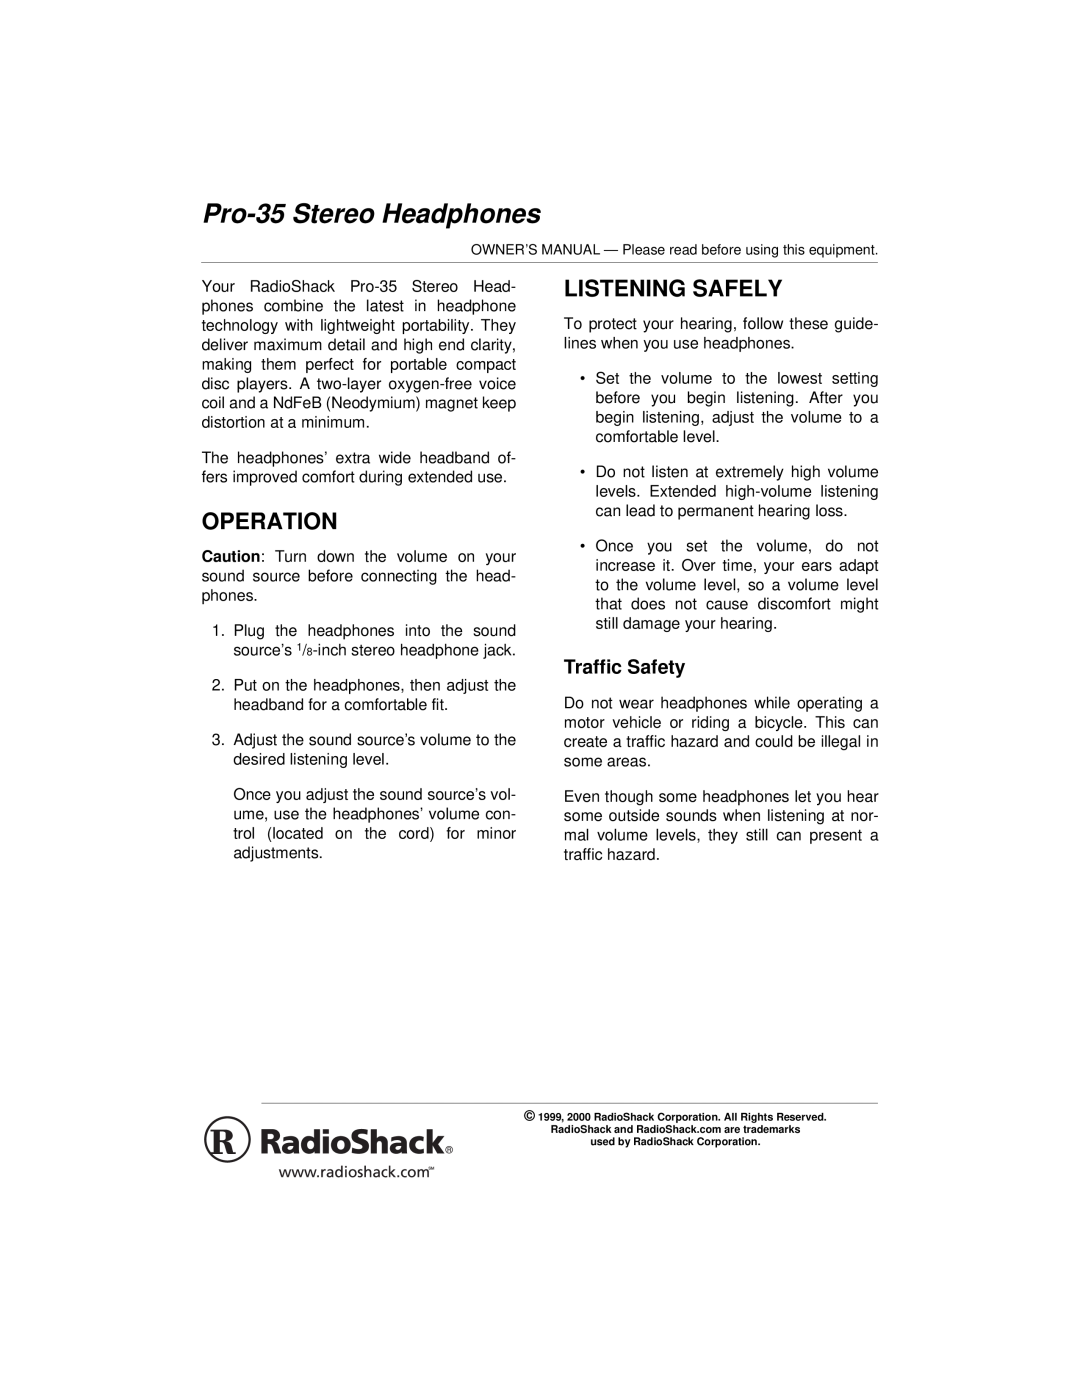 Blackberry PRO-35 owner manual Operation, Listening Safely, Pro-35Stereo Headphones, Traffic Safety 